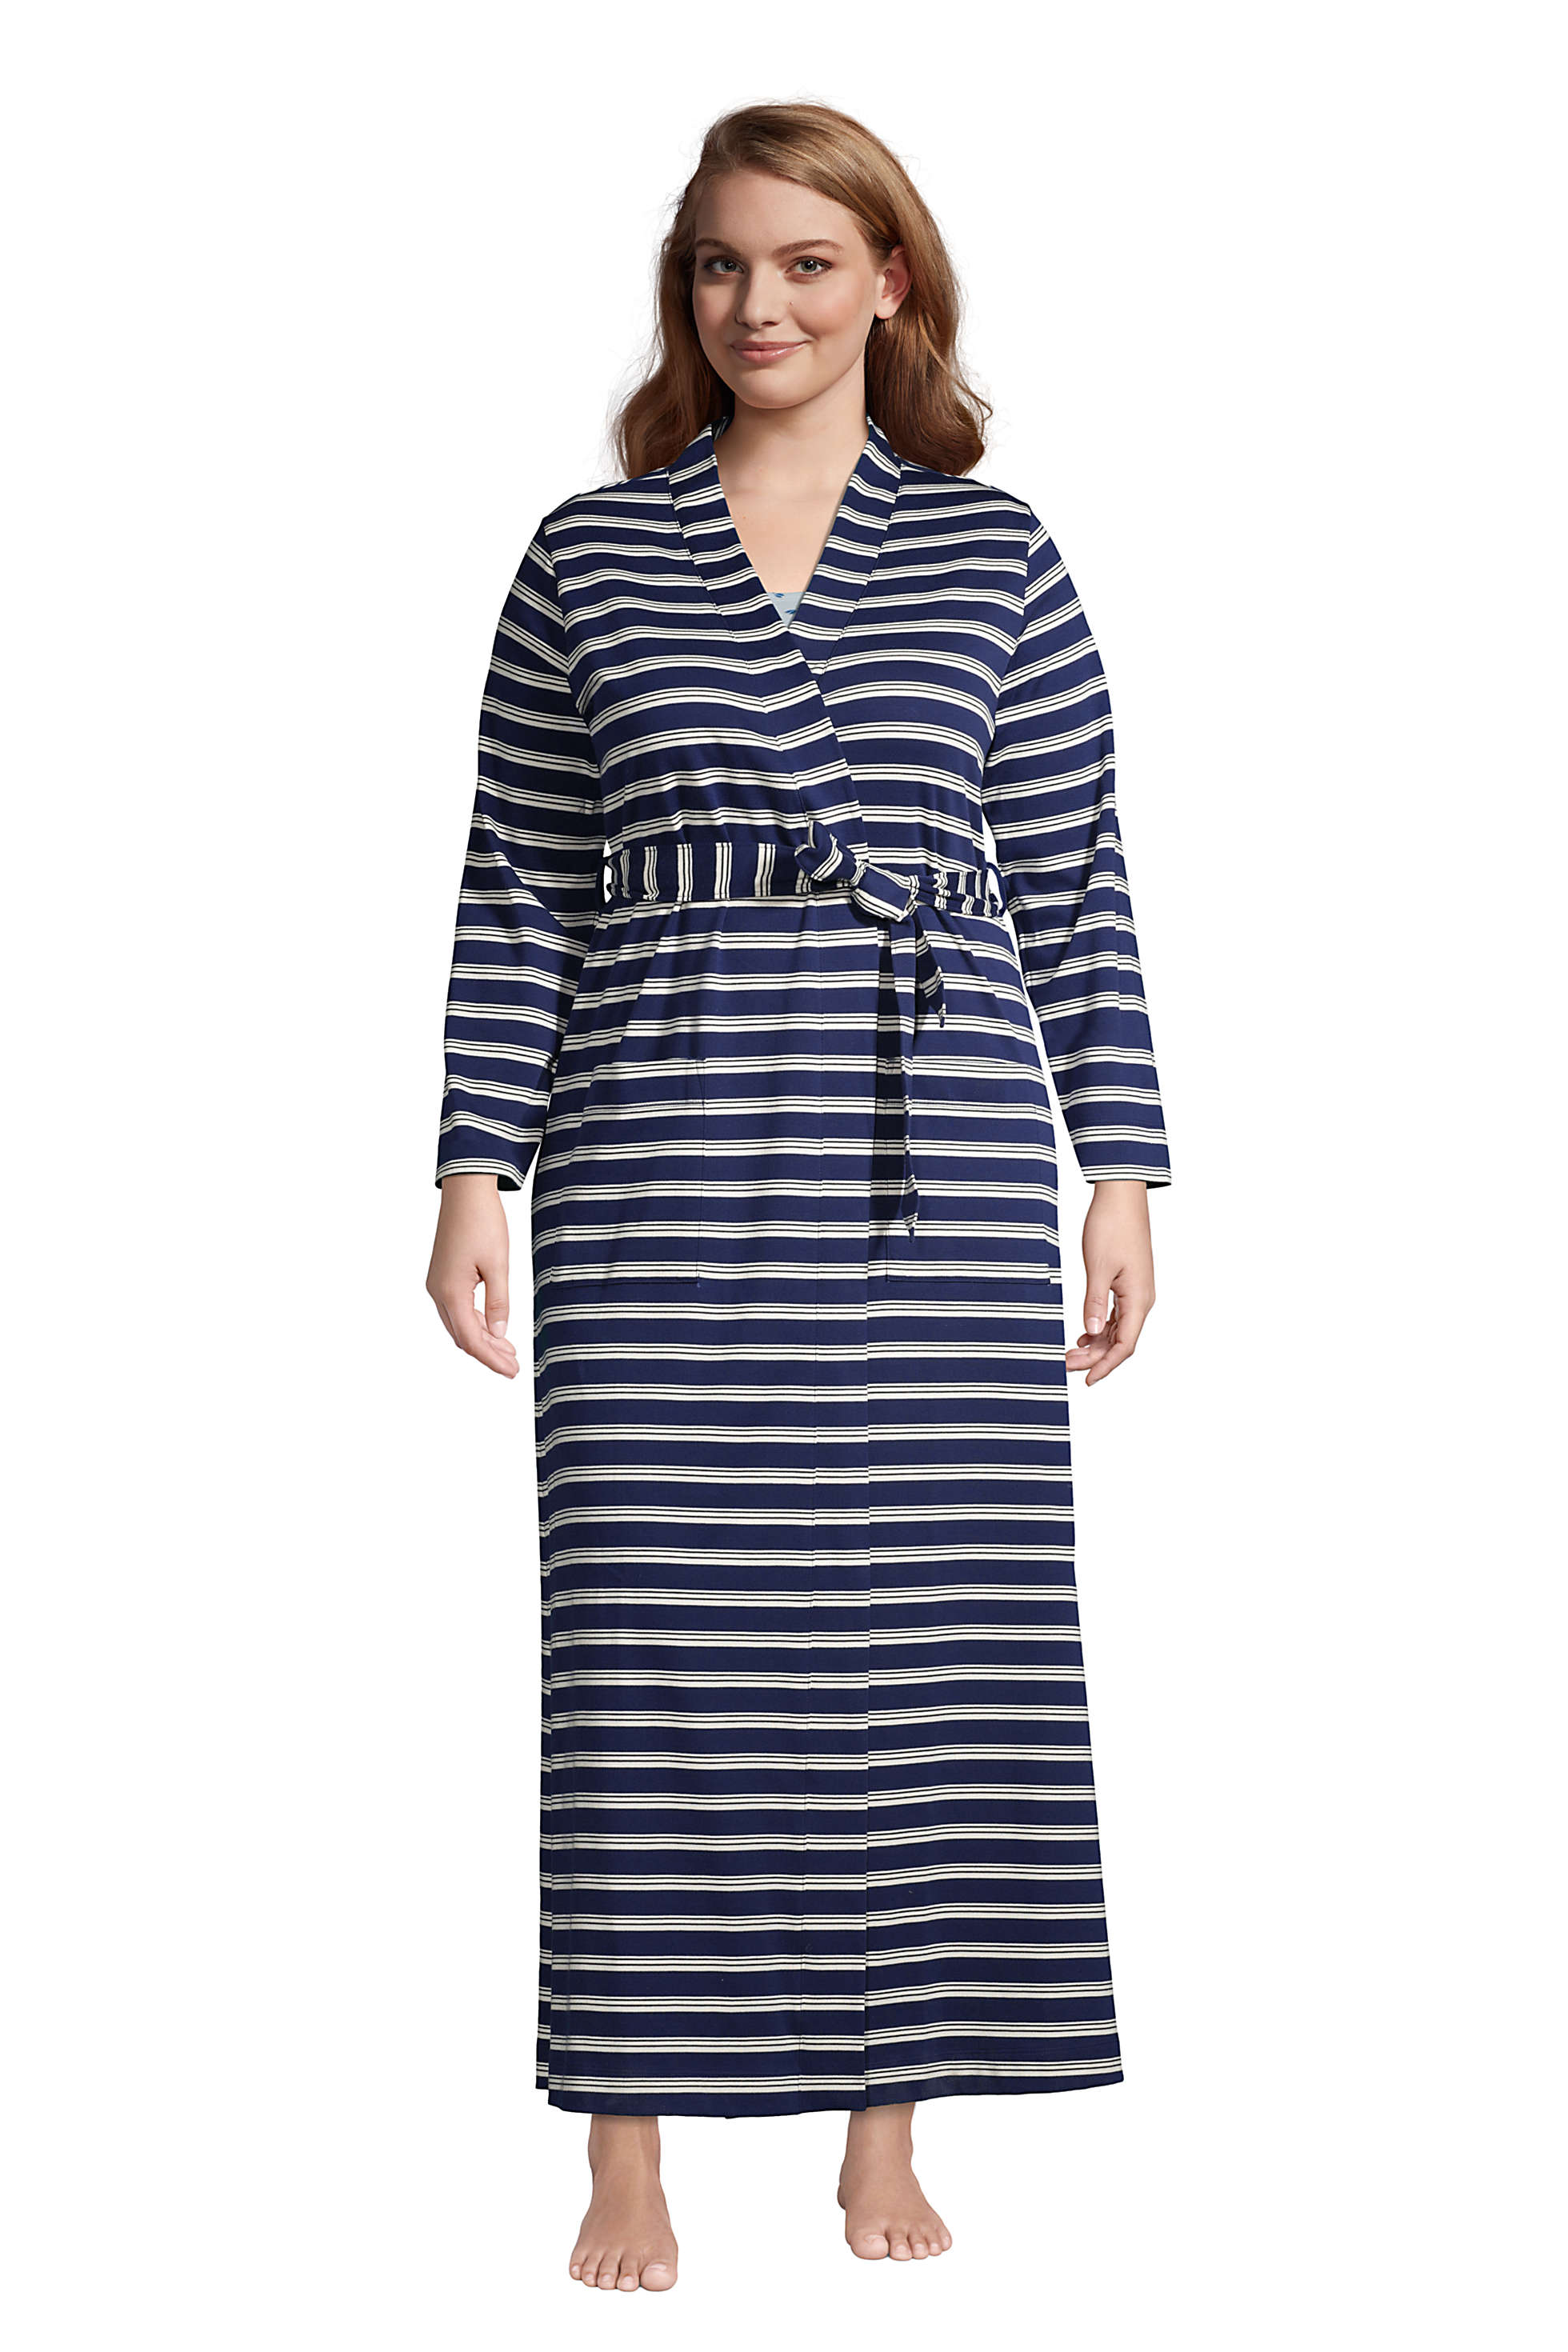 Cozy Plus Robes For Women - and